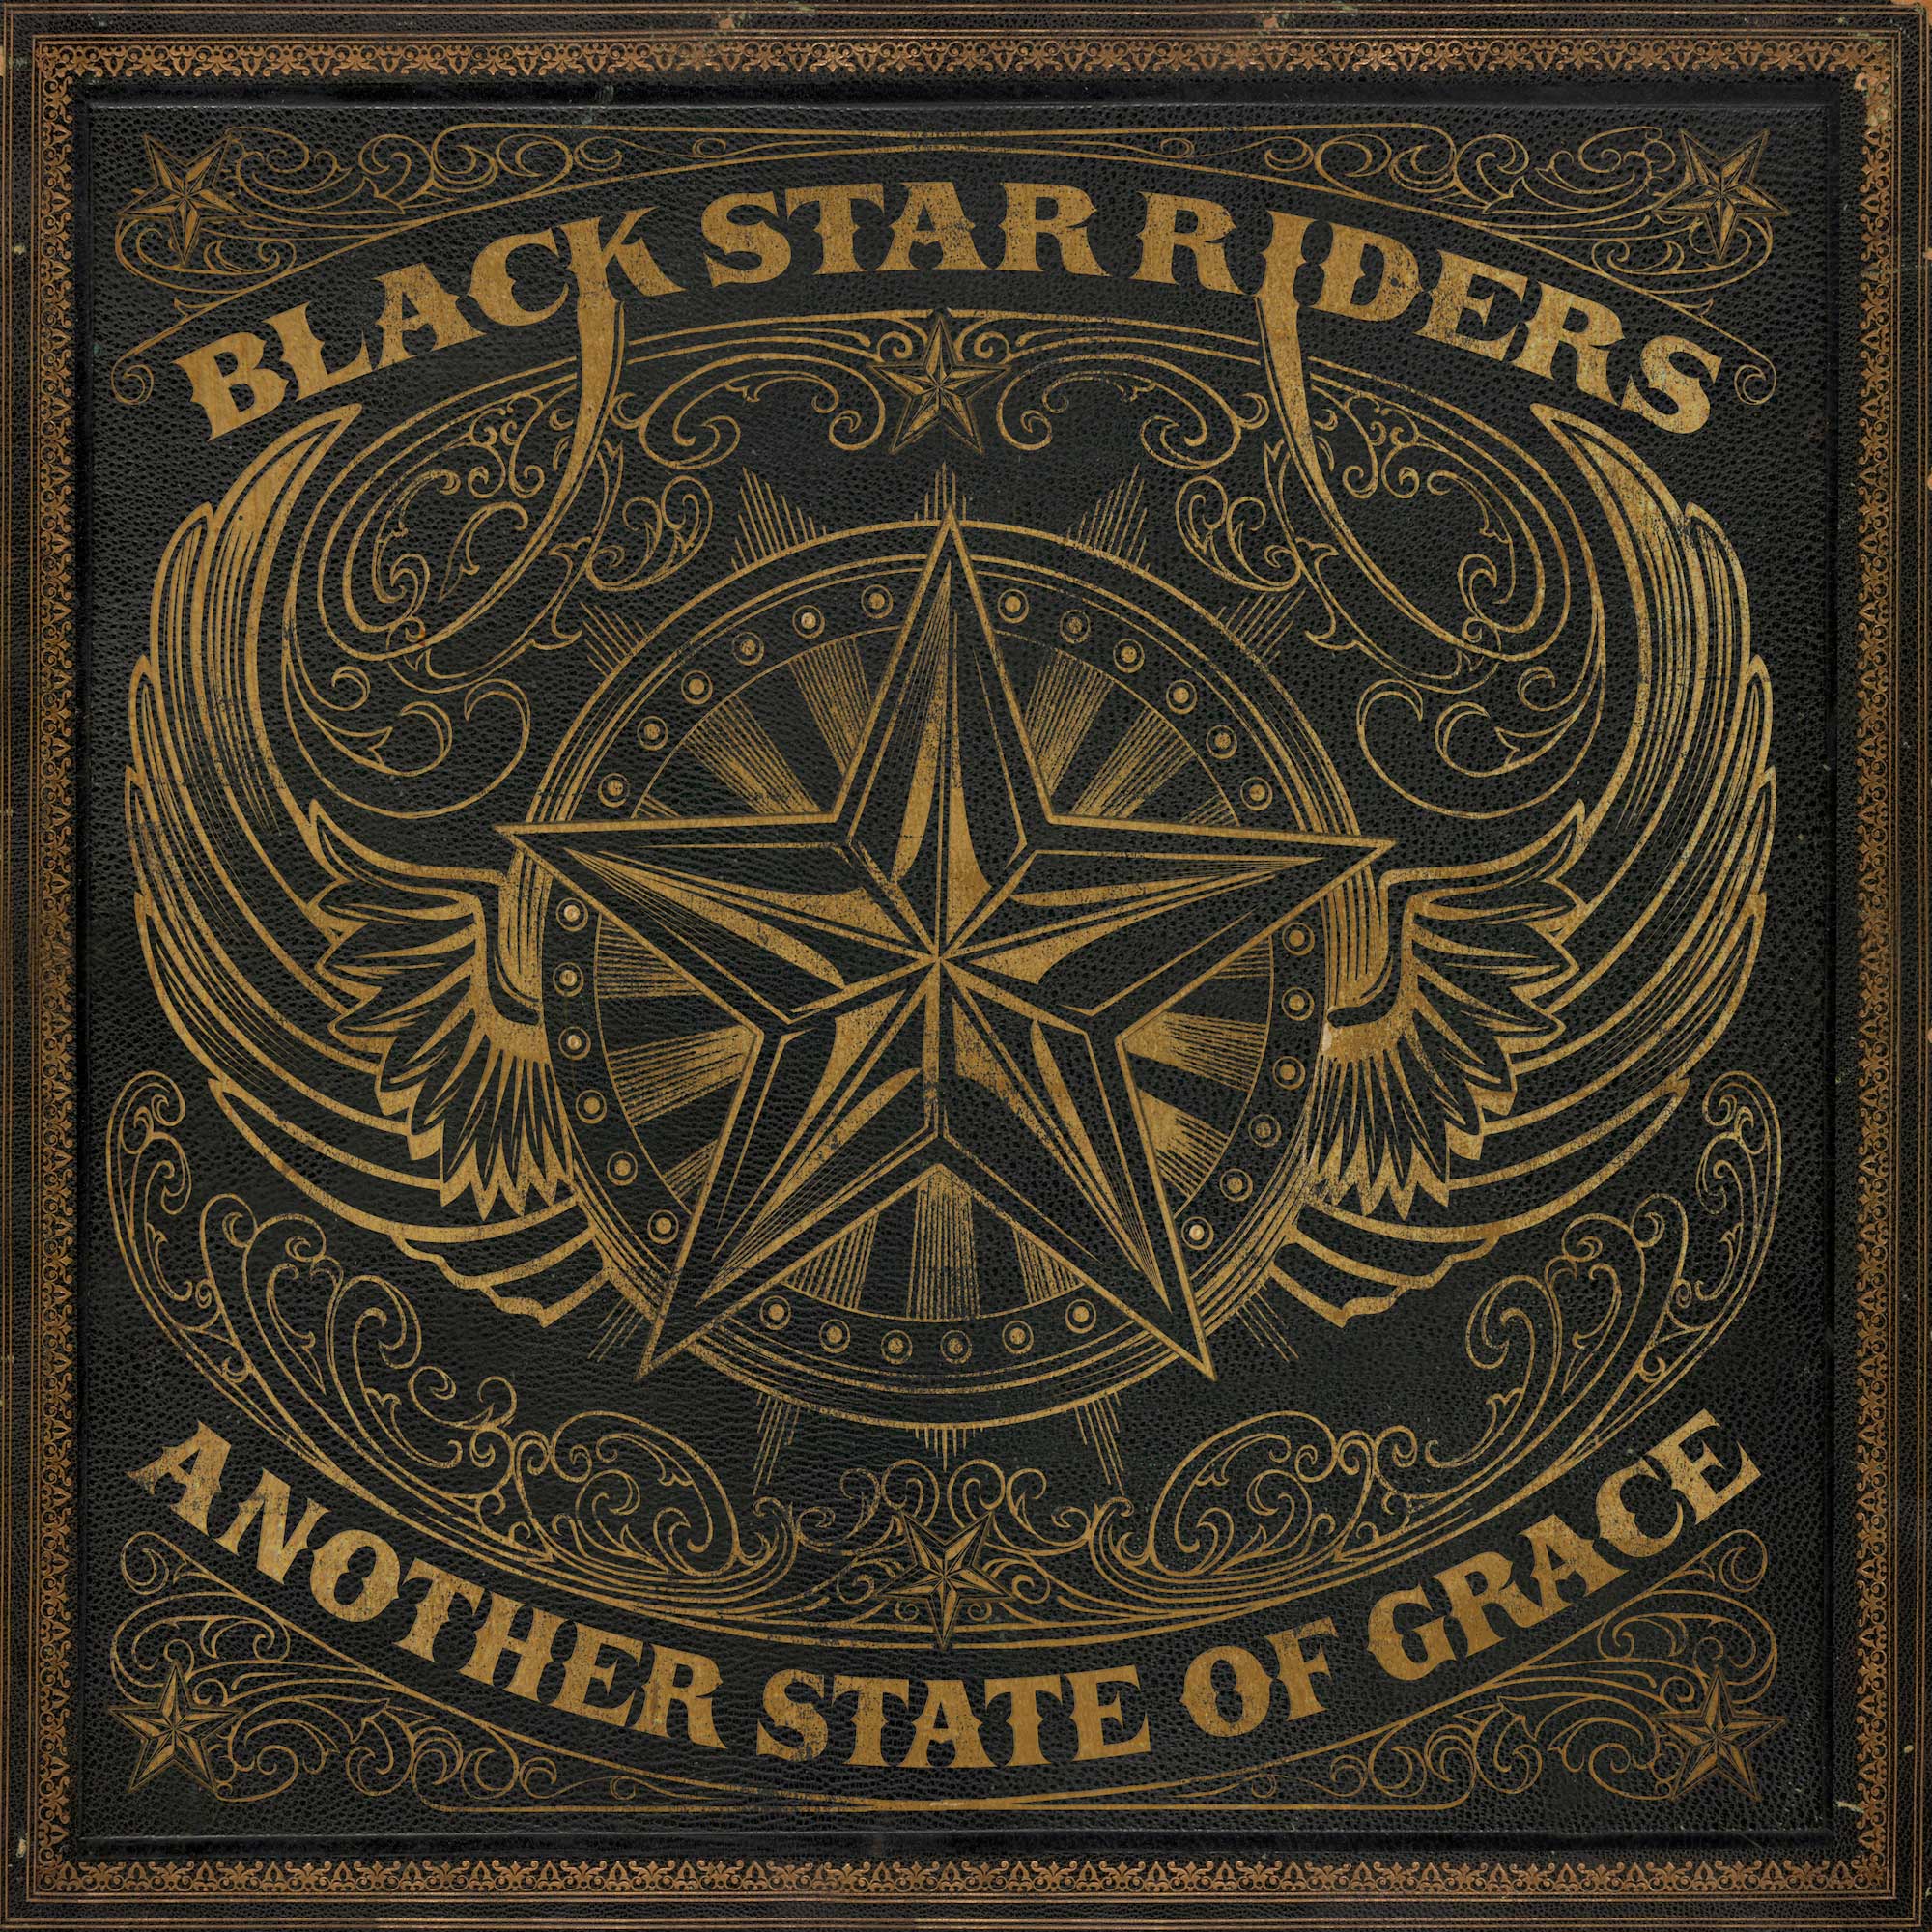 Black Star Riders : Another State Of Grace